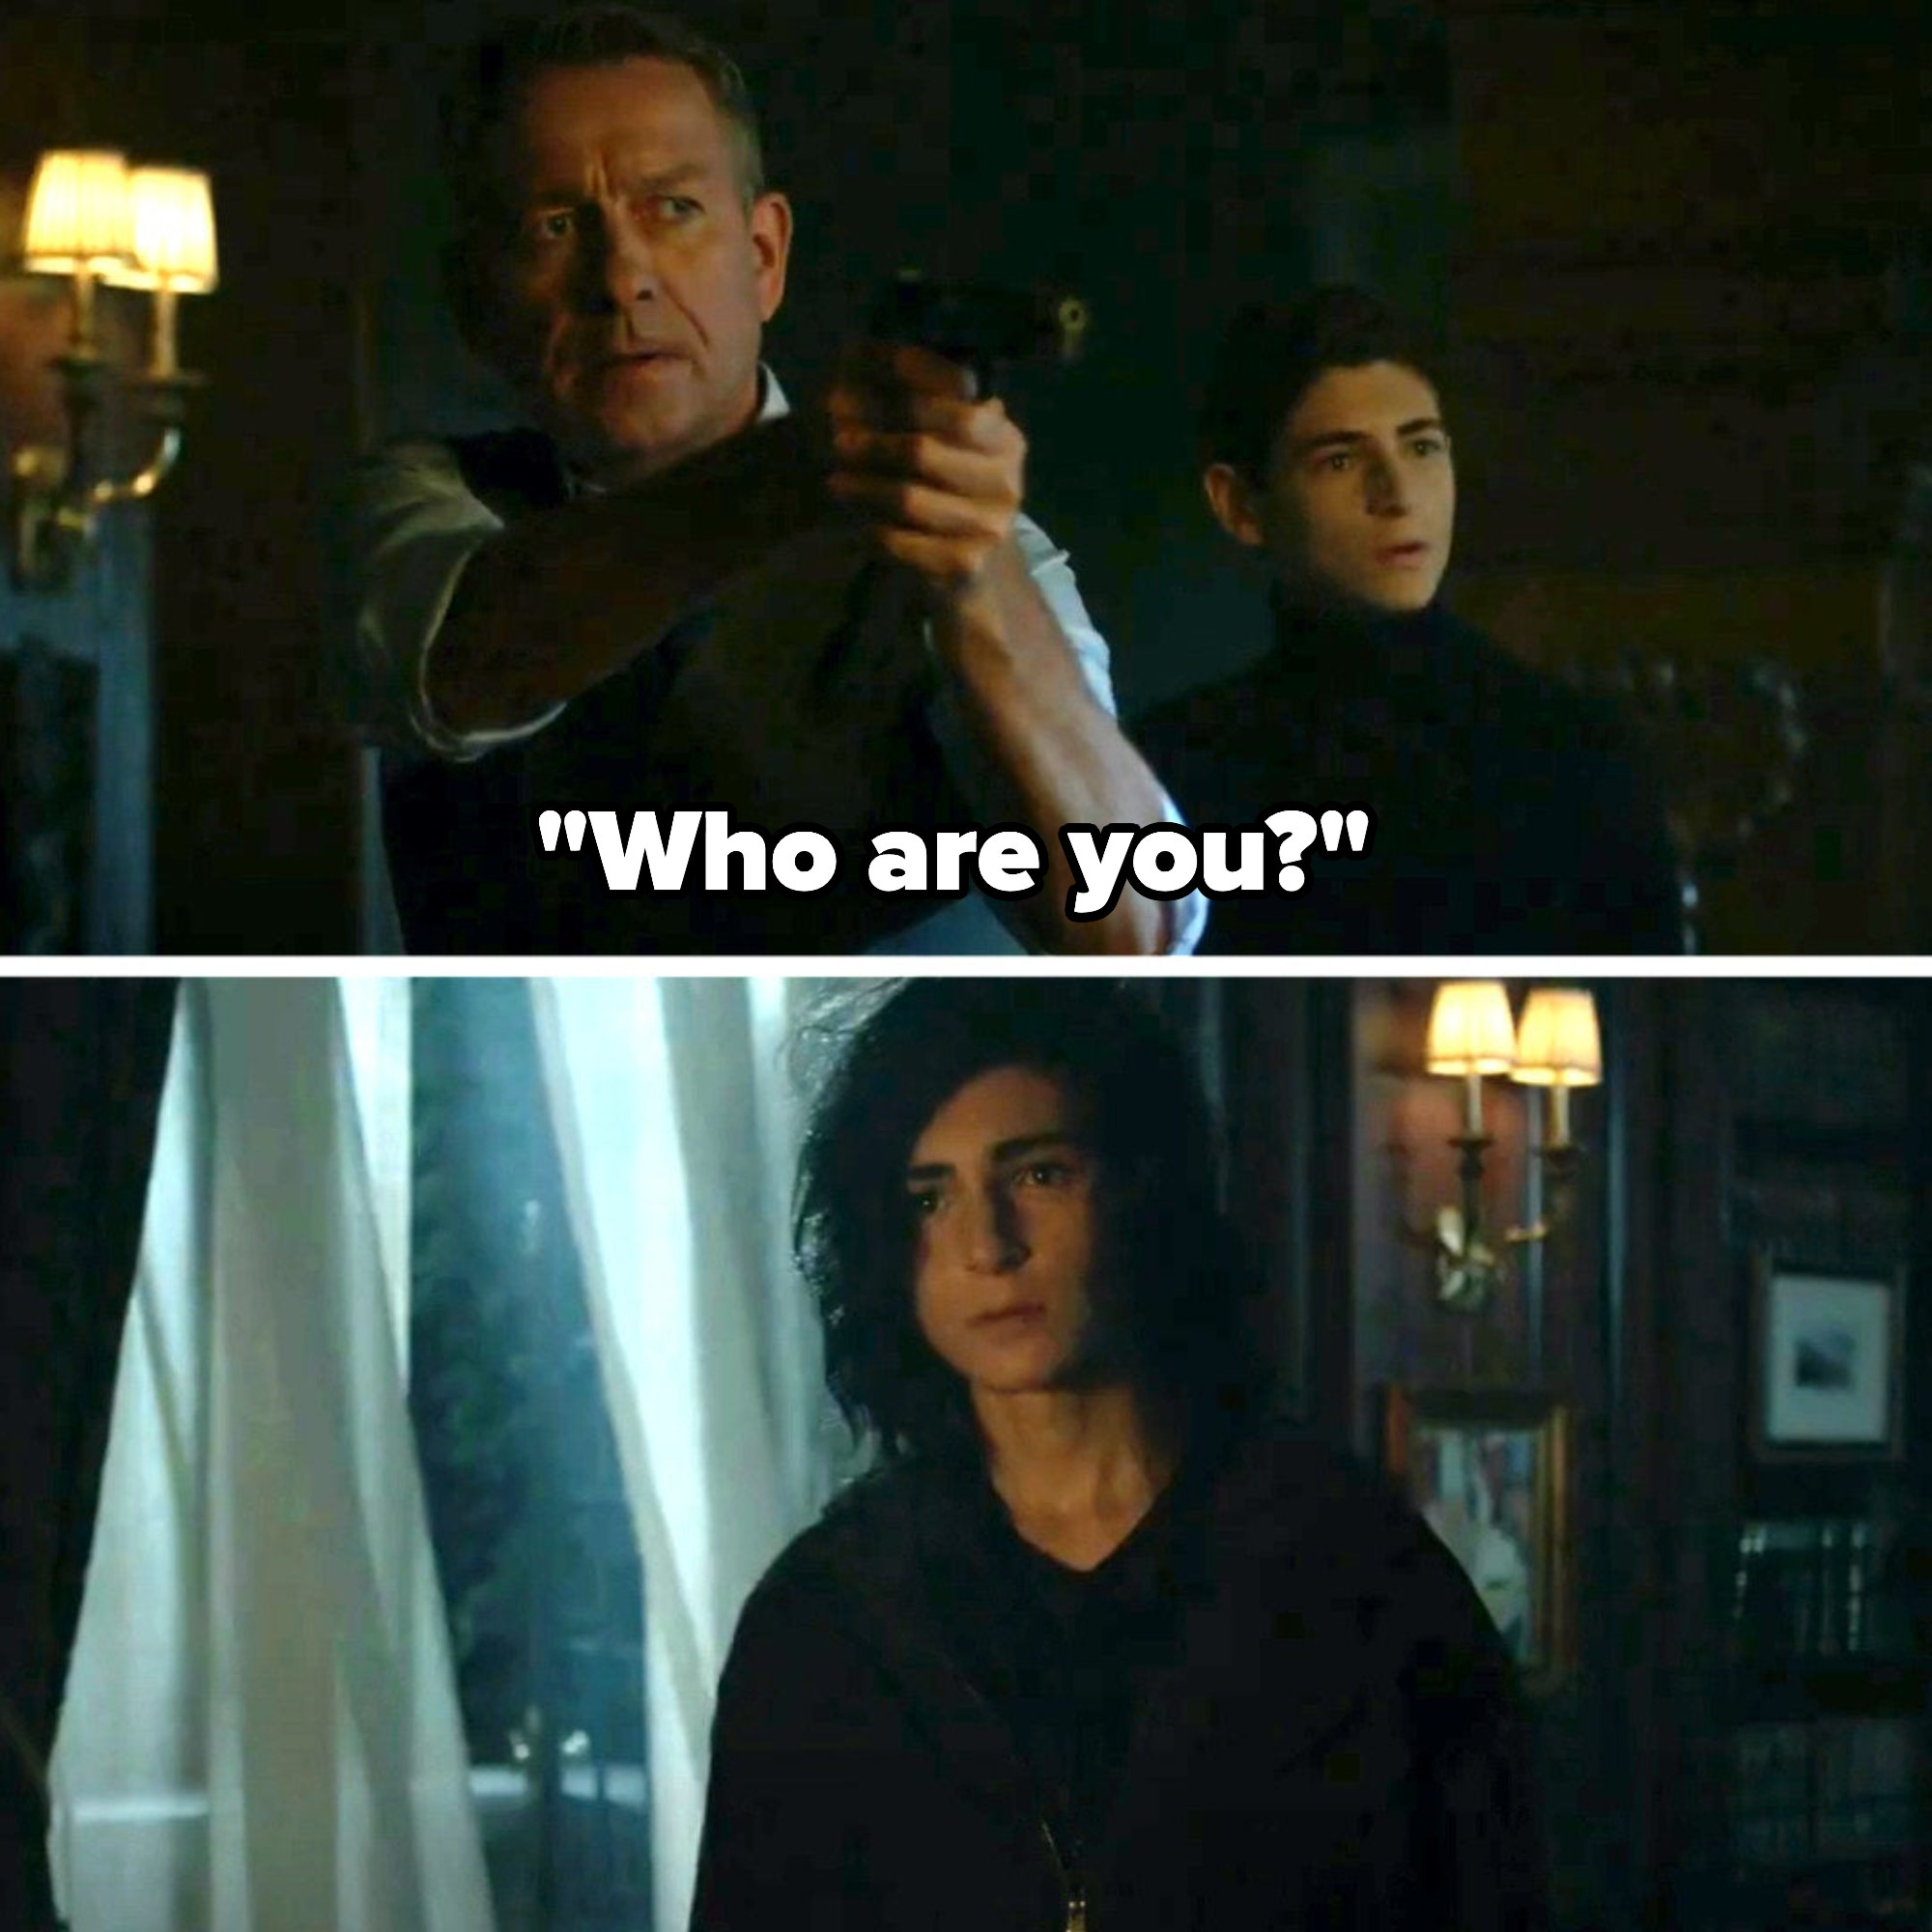 Alfred, with a gun and Bruce next to him, asks the intruder who they are — we see they look just like Bruce